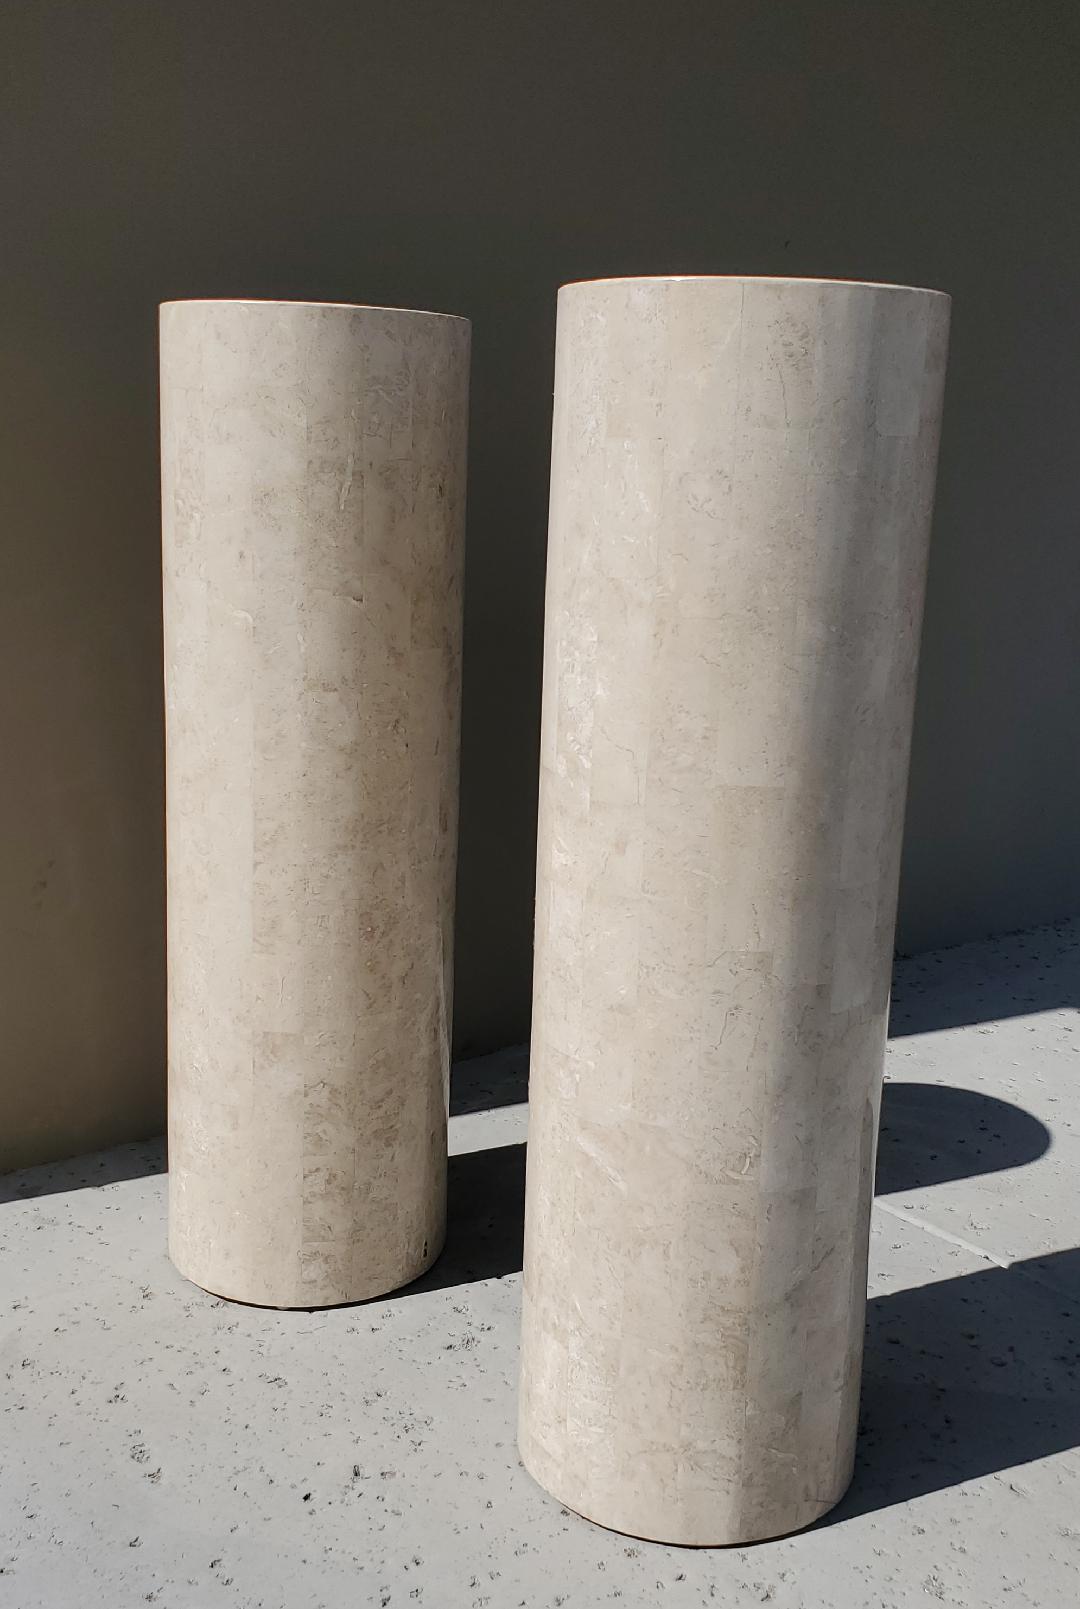 Marquis Collection of Beverly Hills, 1980s Round Tessellated Stone Pedestals 2 14